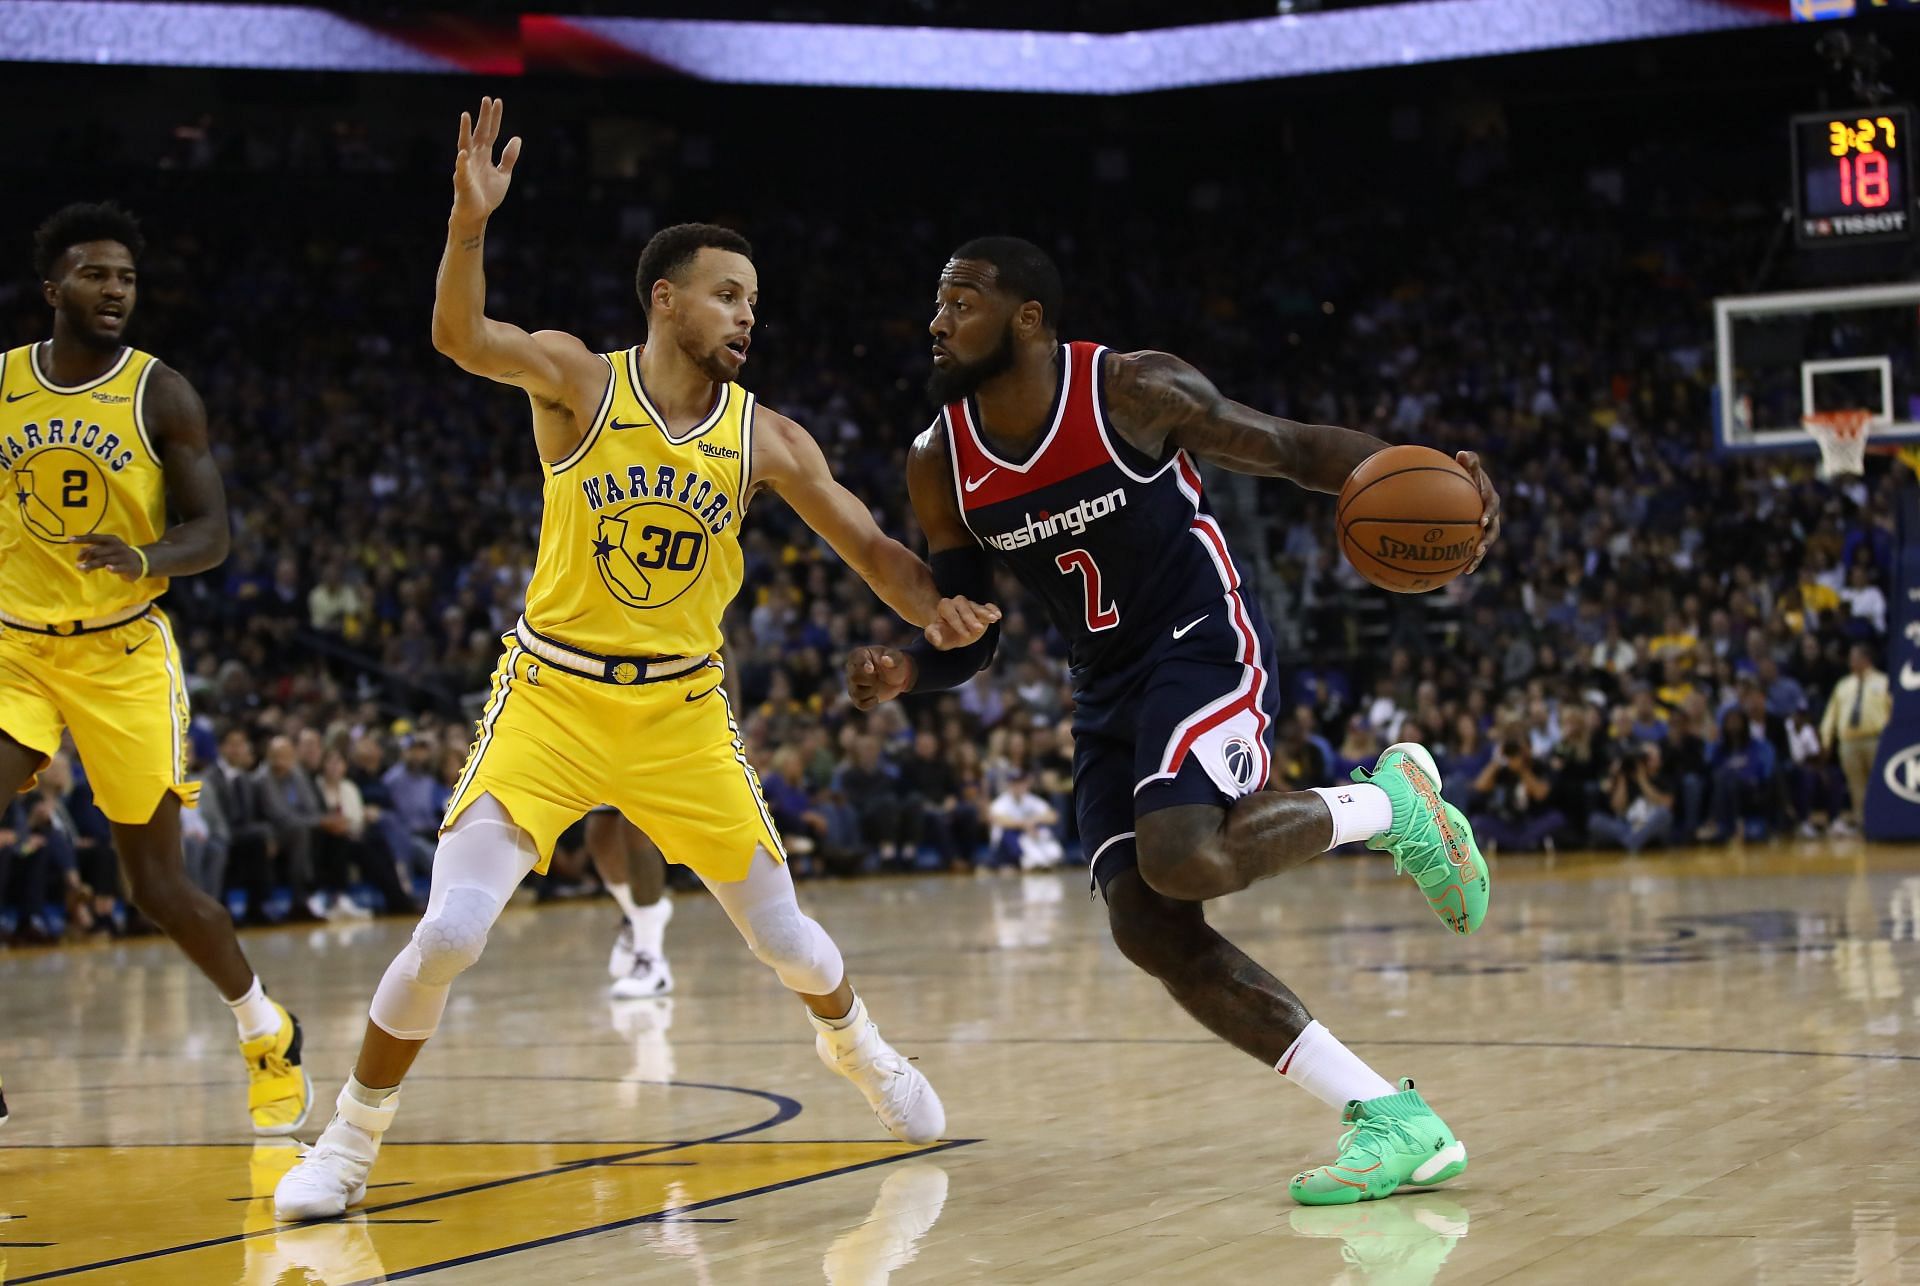 Steph Curry guards John Wall during an NBA game.